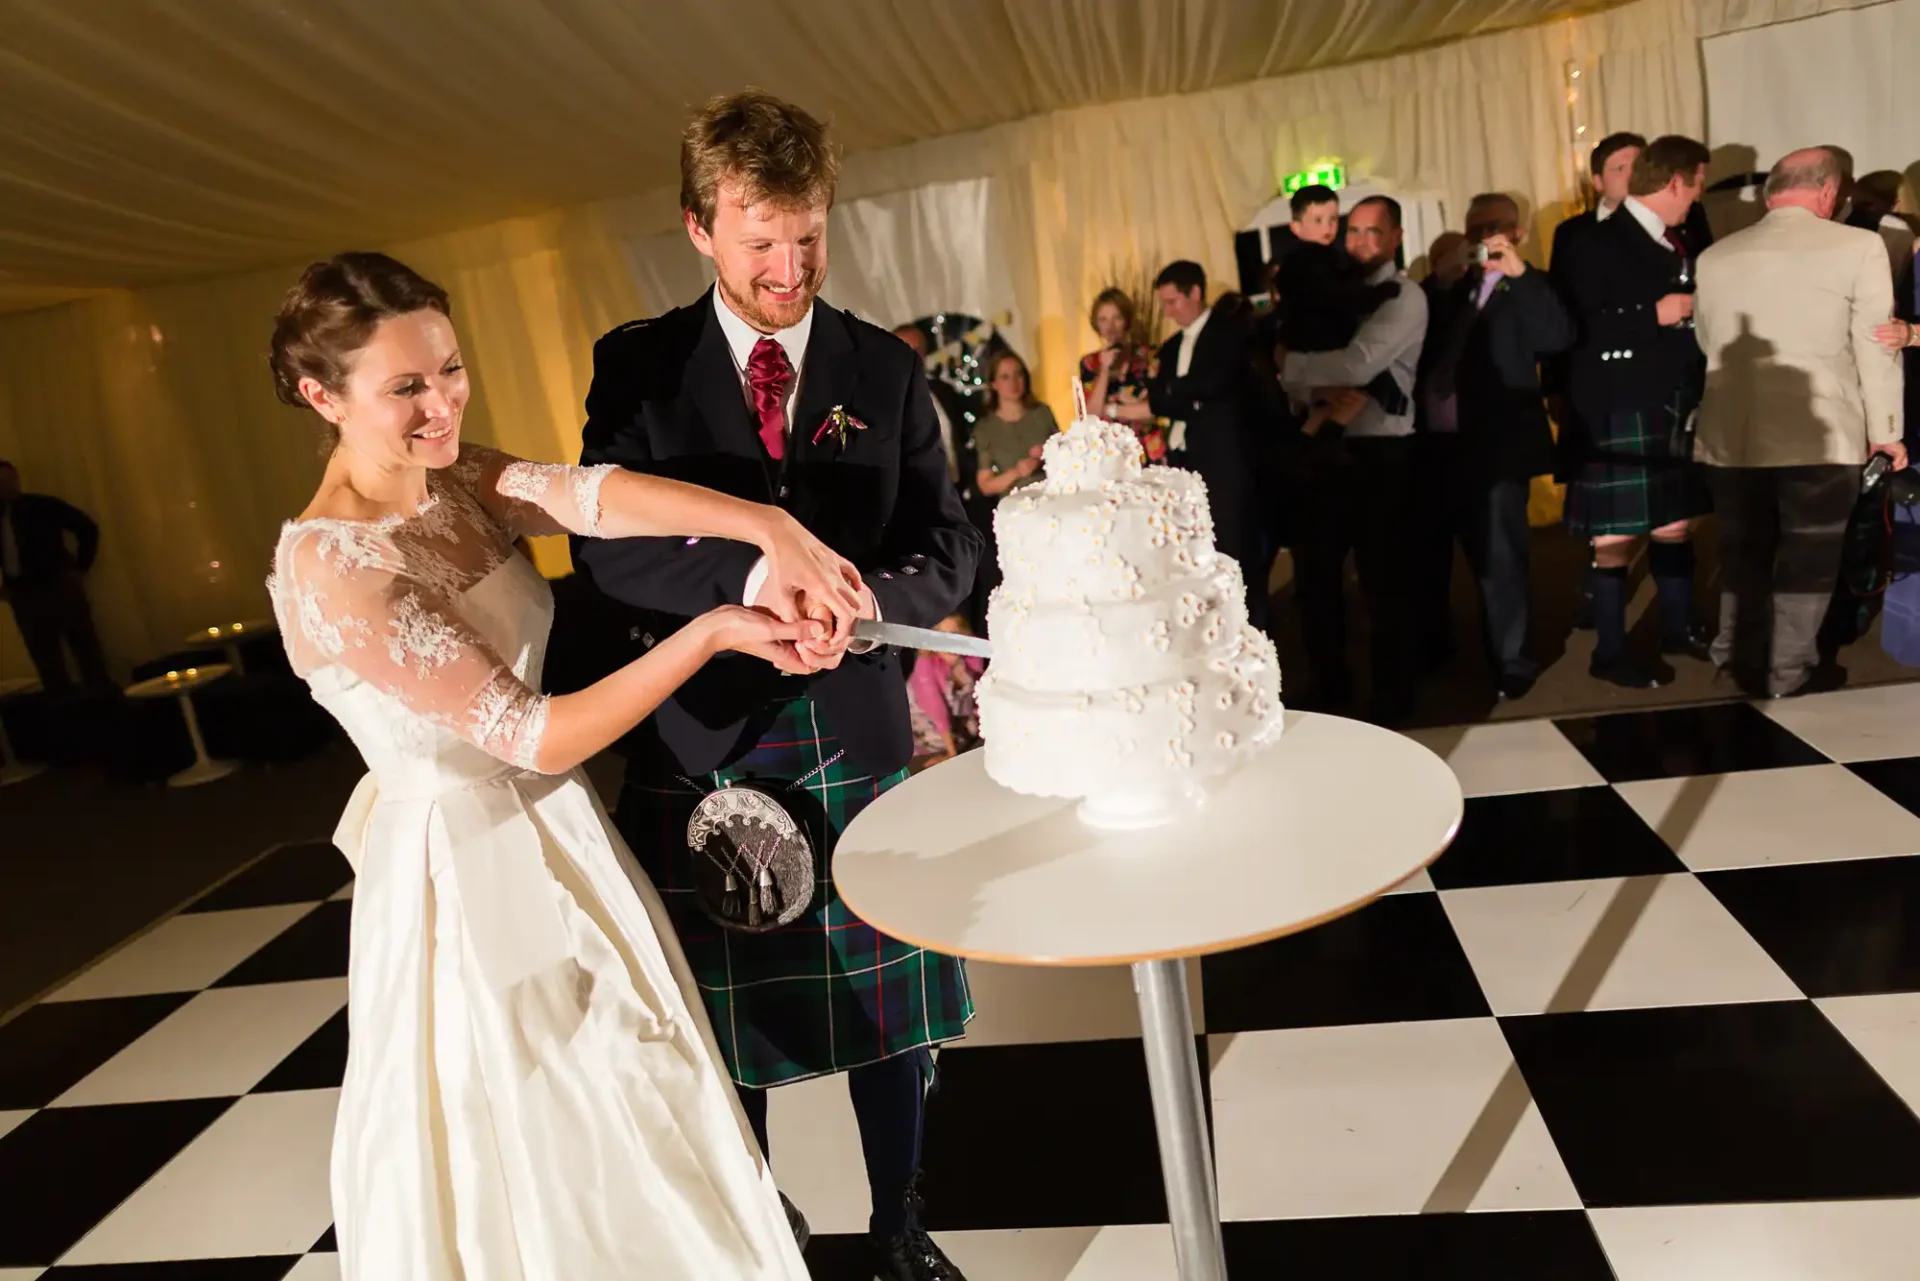 A bride and groom in formal attire, the groom in a kilt, happily cutting a white multi-tier wedding cake at a reception.